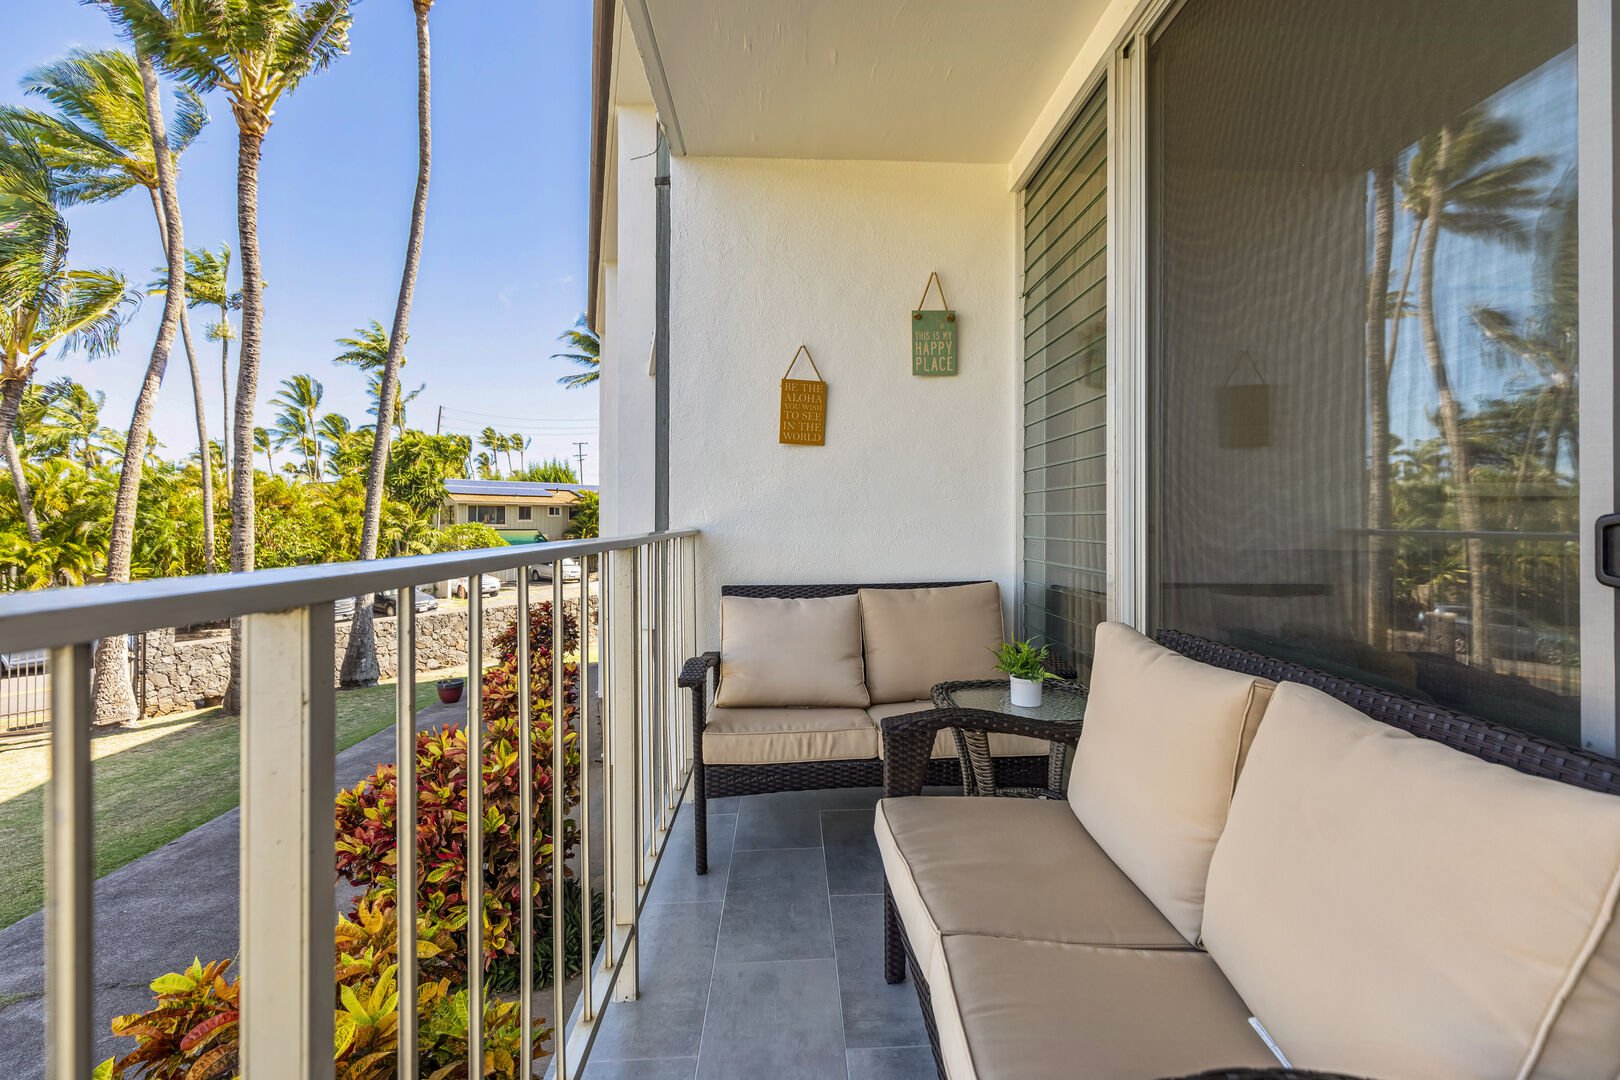 Balcony with patio furniture. Views of the backyard of the building and Kuau Cove with many palm trees